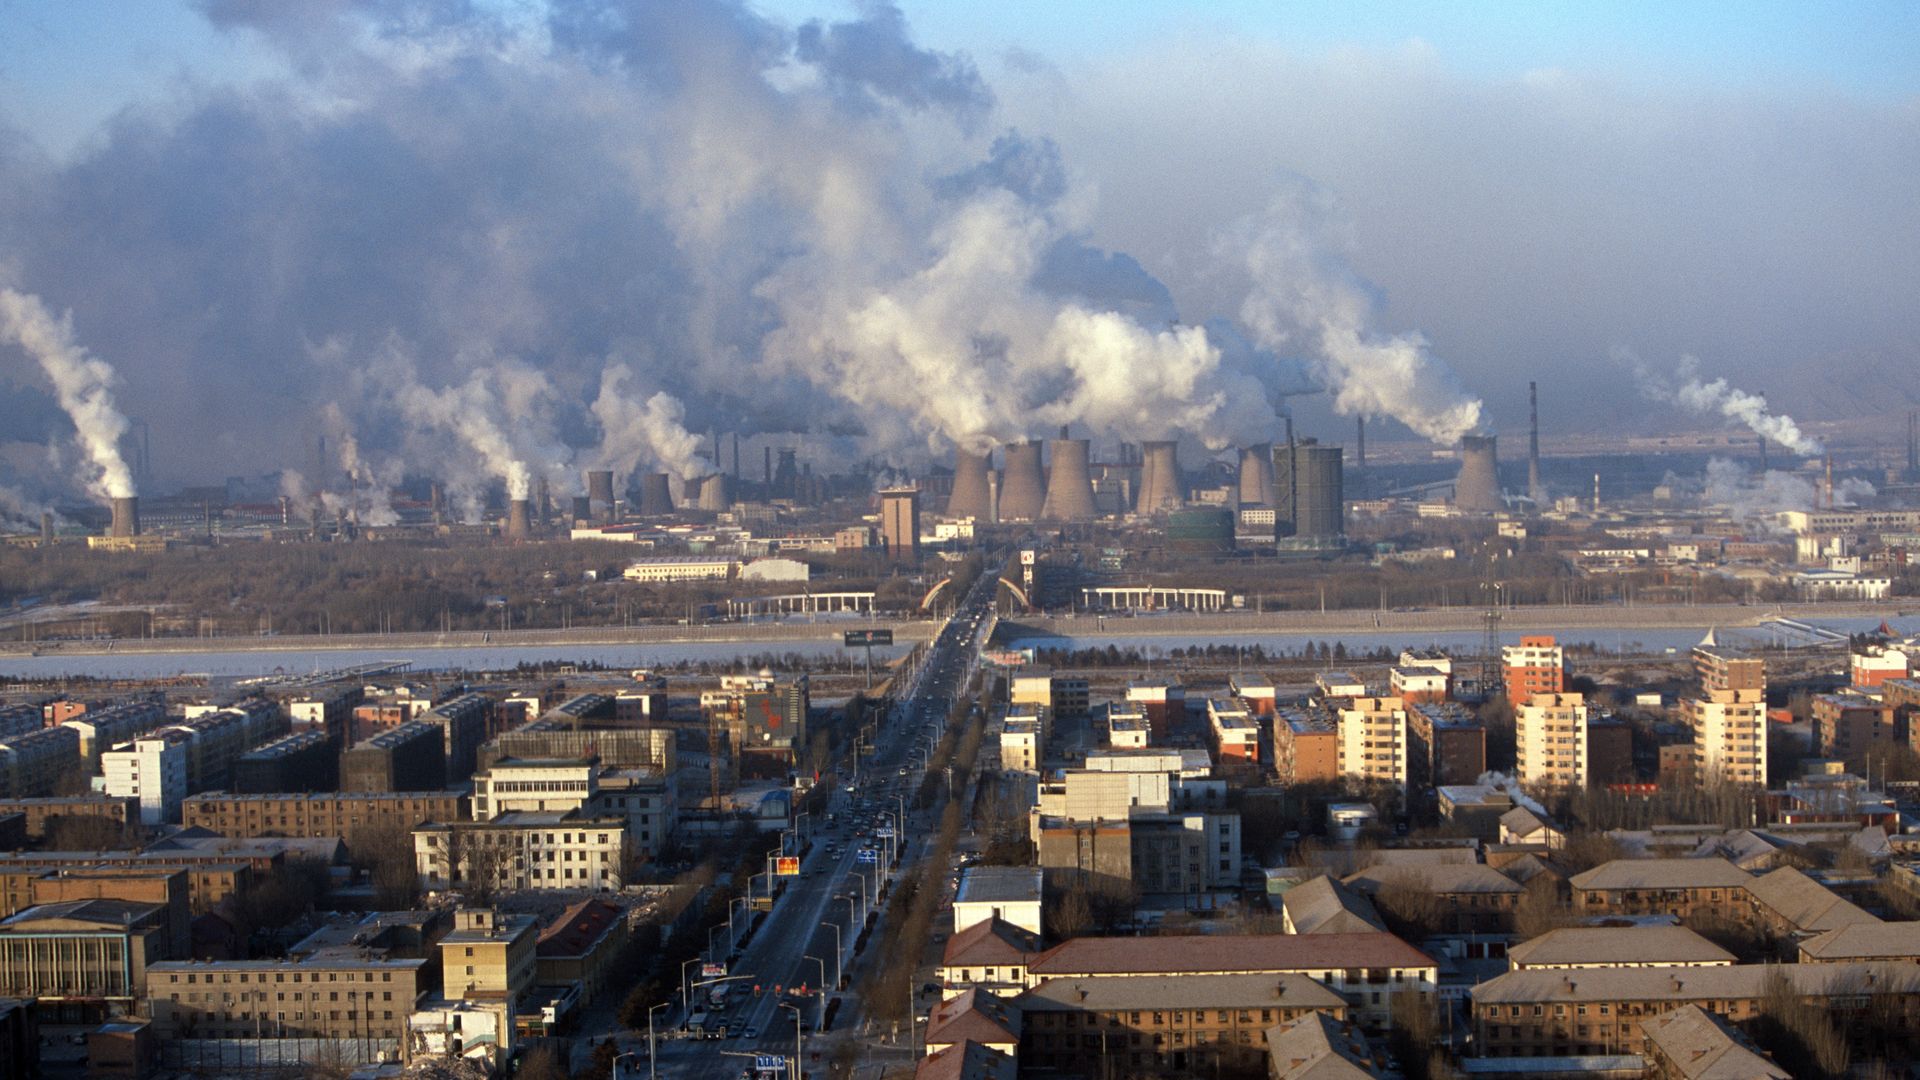 The Bao Steel mill in the morning, in Baotou, Inner Mongolia, China.